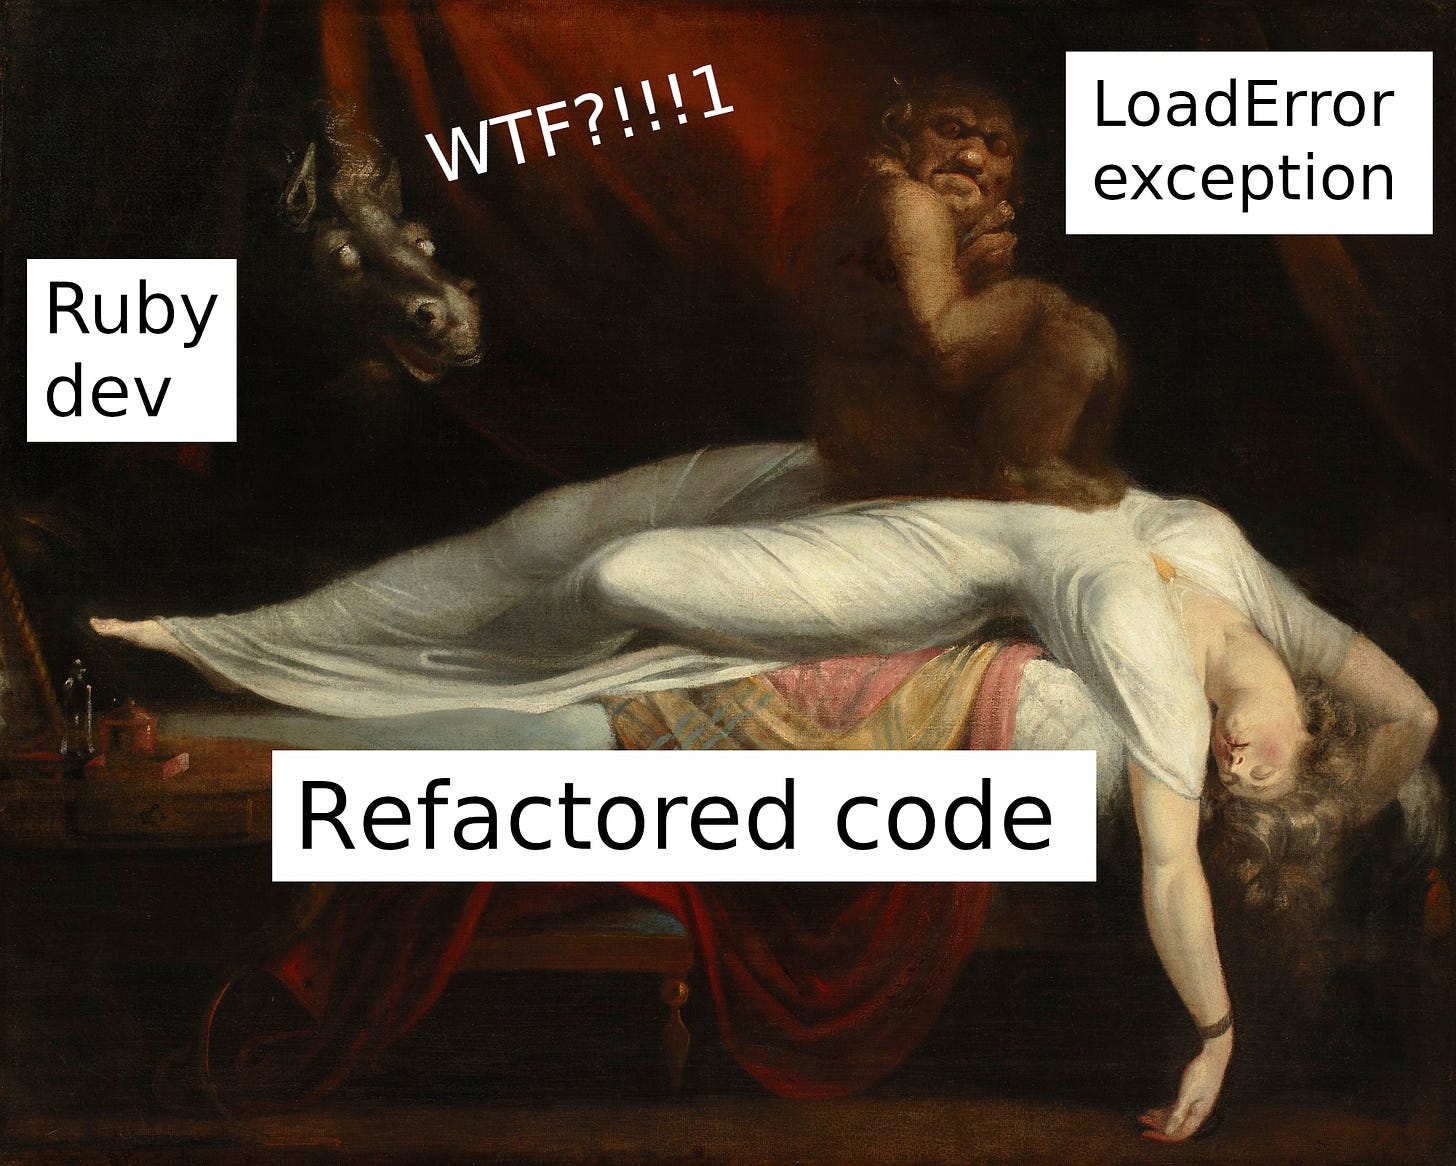 Classic oil painting of a sleeping woman haunted by a Ruby LoadError nightmare. A puzzled Ruby programmer in the background.